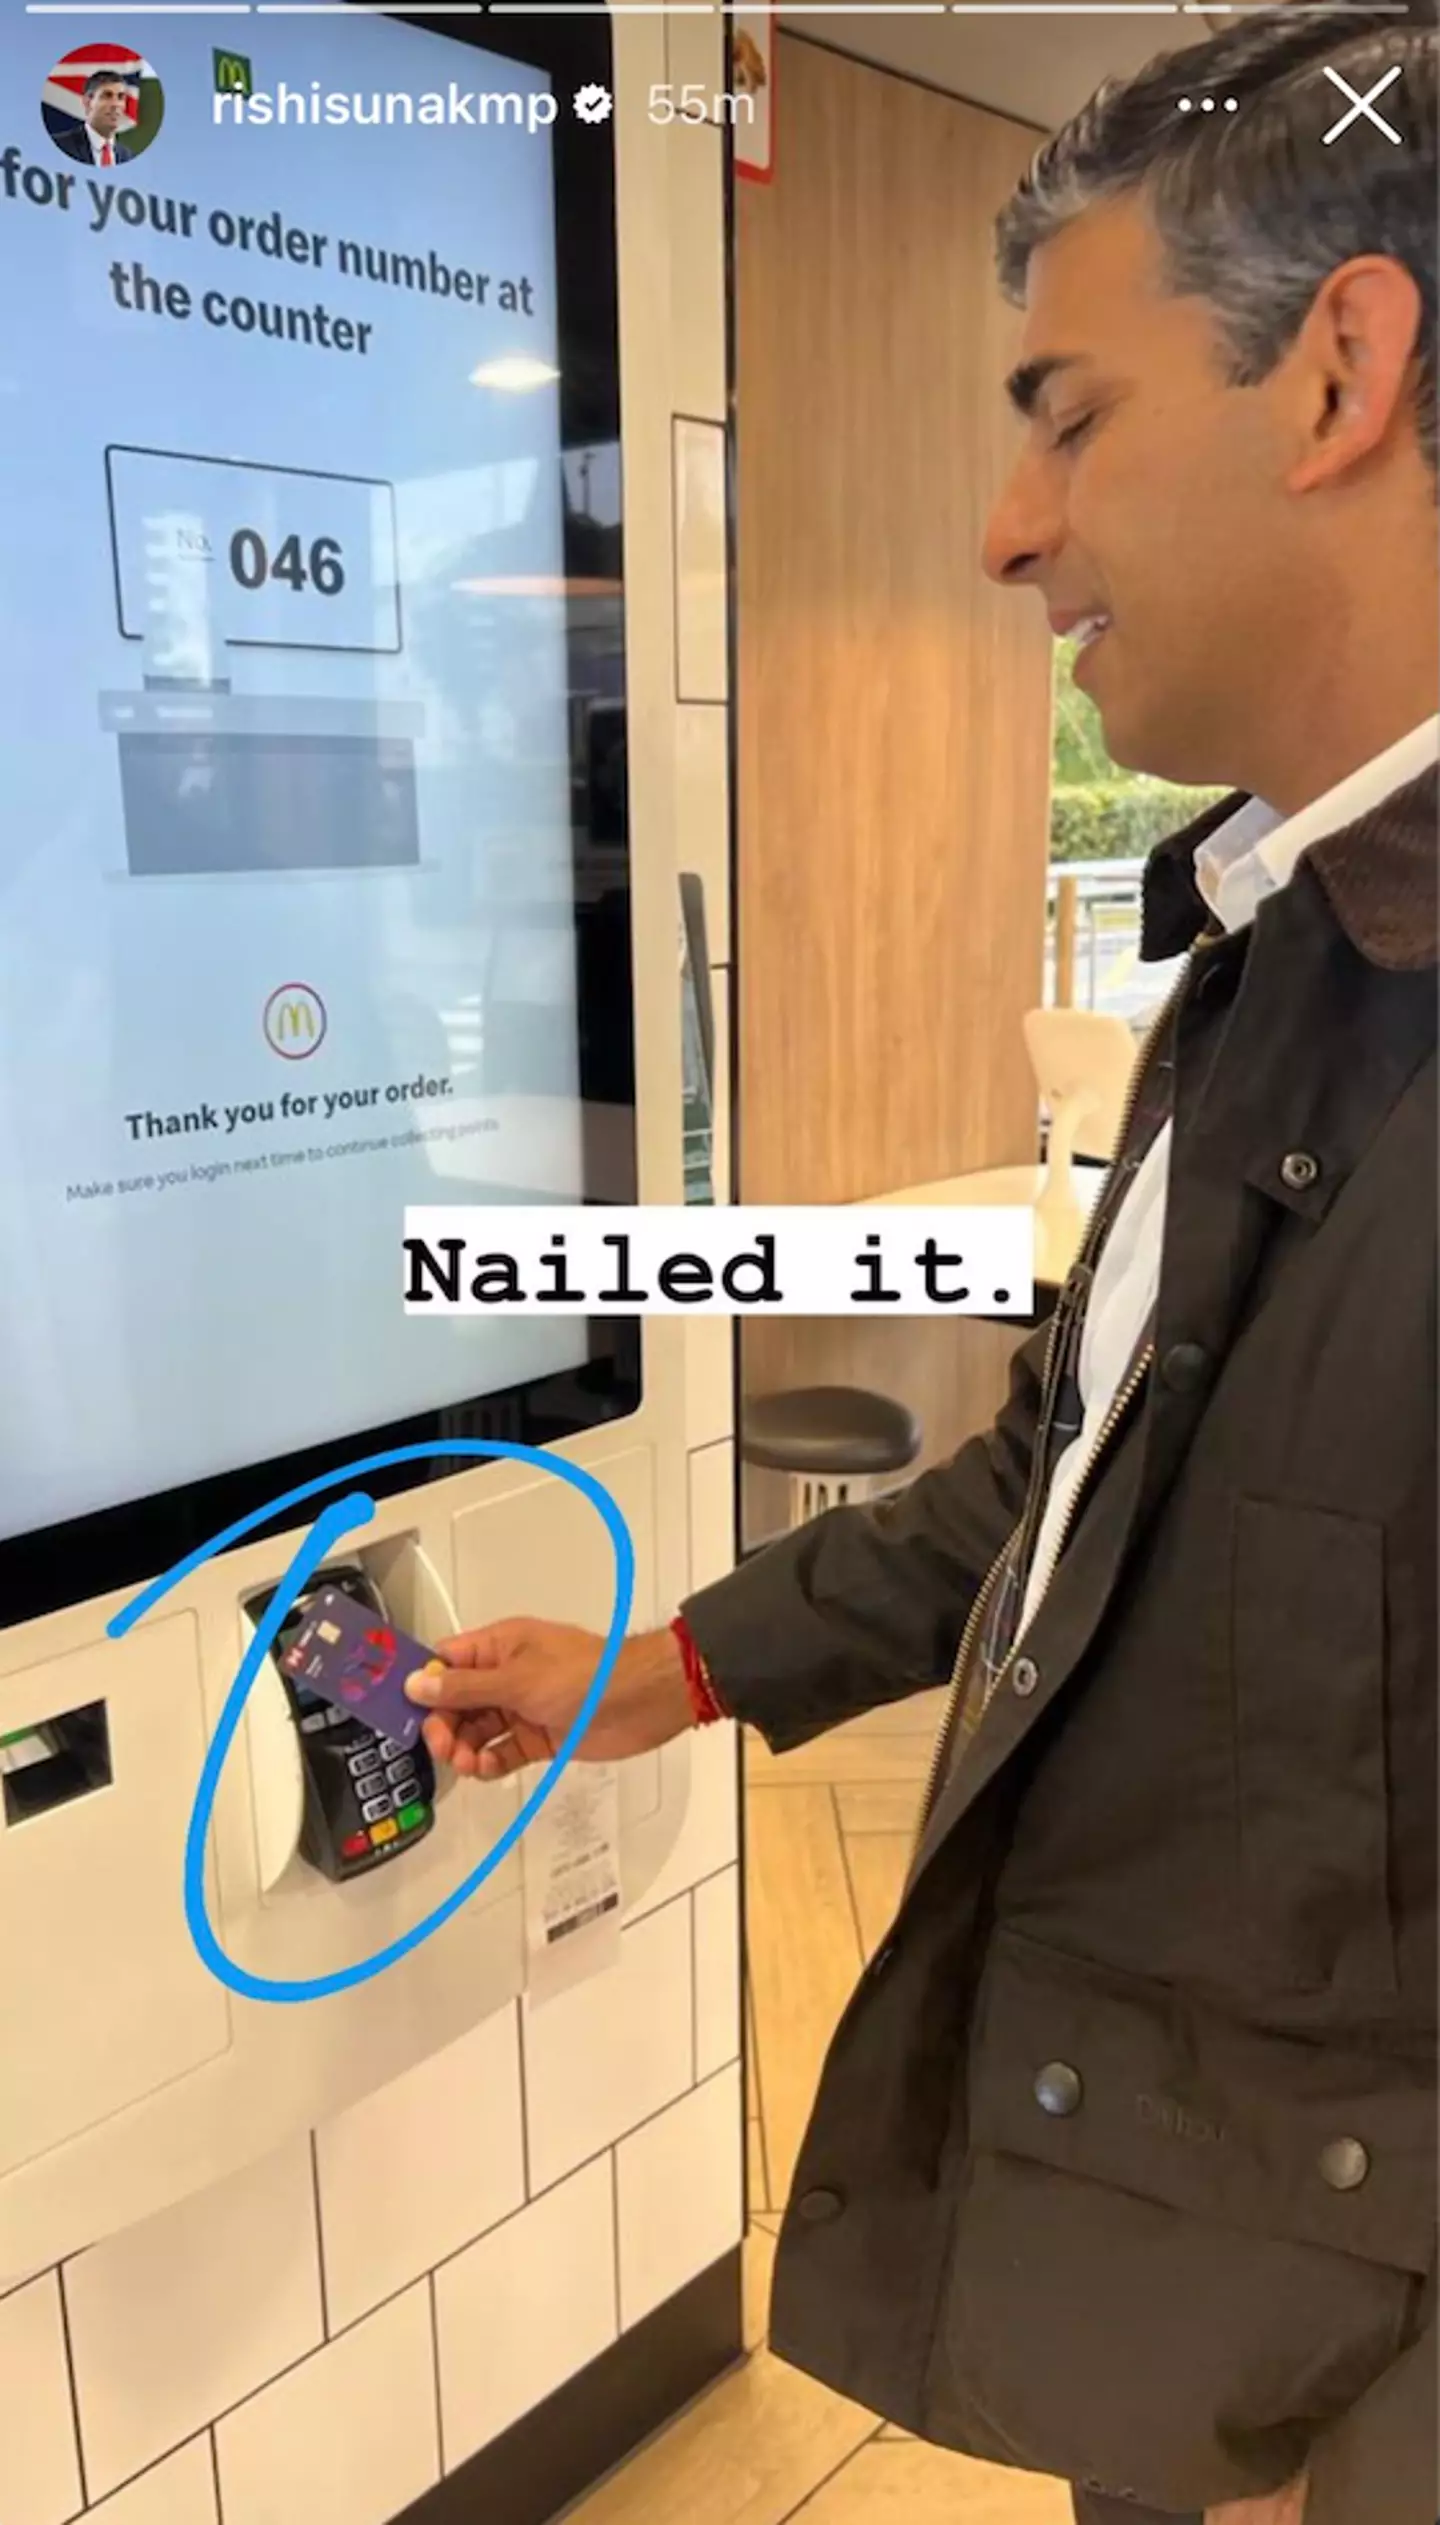 Sunak supposedly paying in McDonald's.